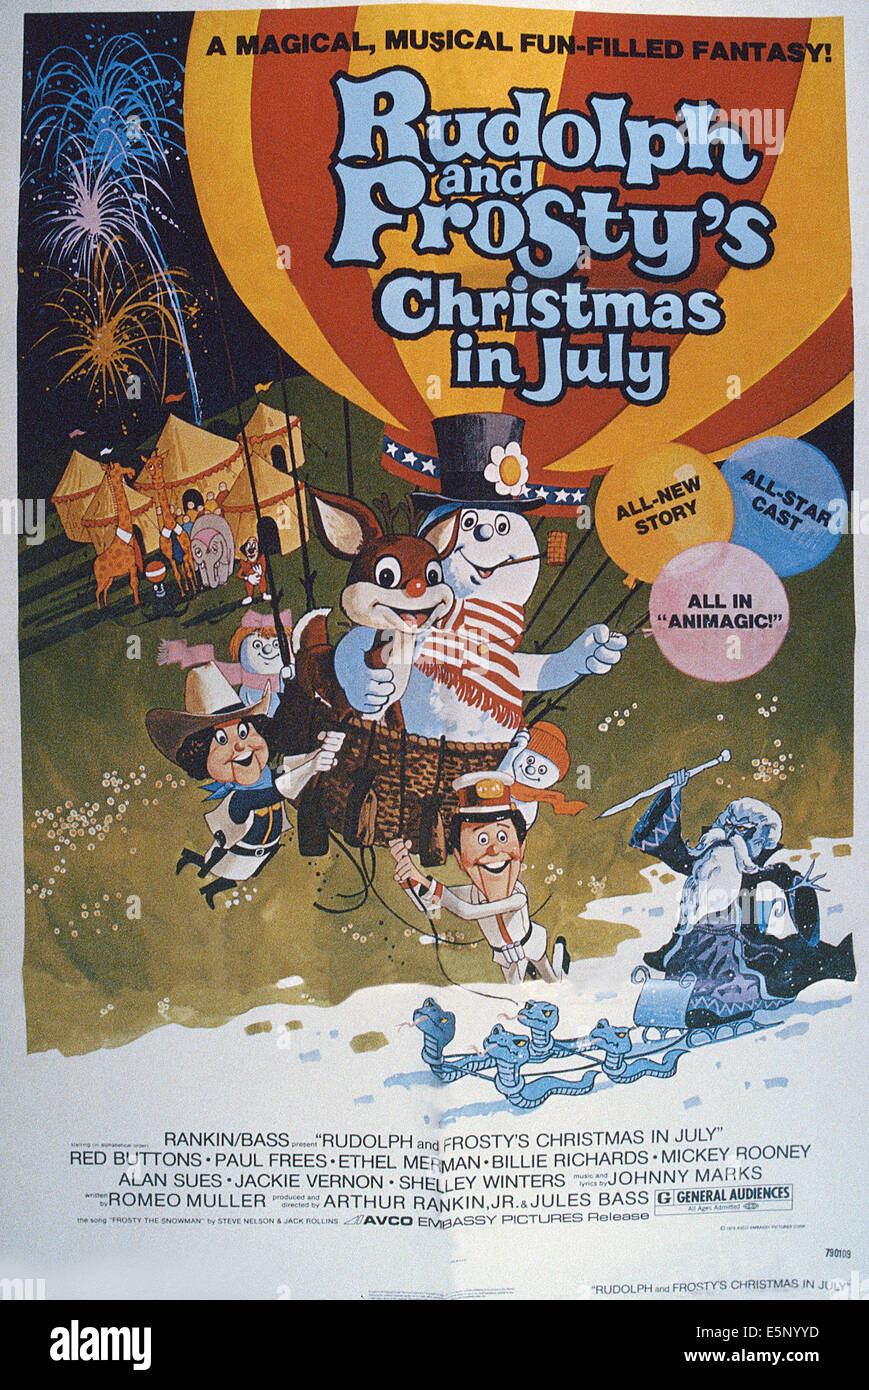 RUDOLPH AND FROSTY'S CHRISTMAS IN JULY, US poster, in basket from left: Rudolph the Red Nosed Reindeer, Frosty the Snowman, Stock Photo